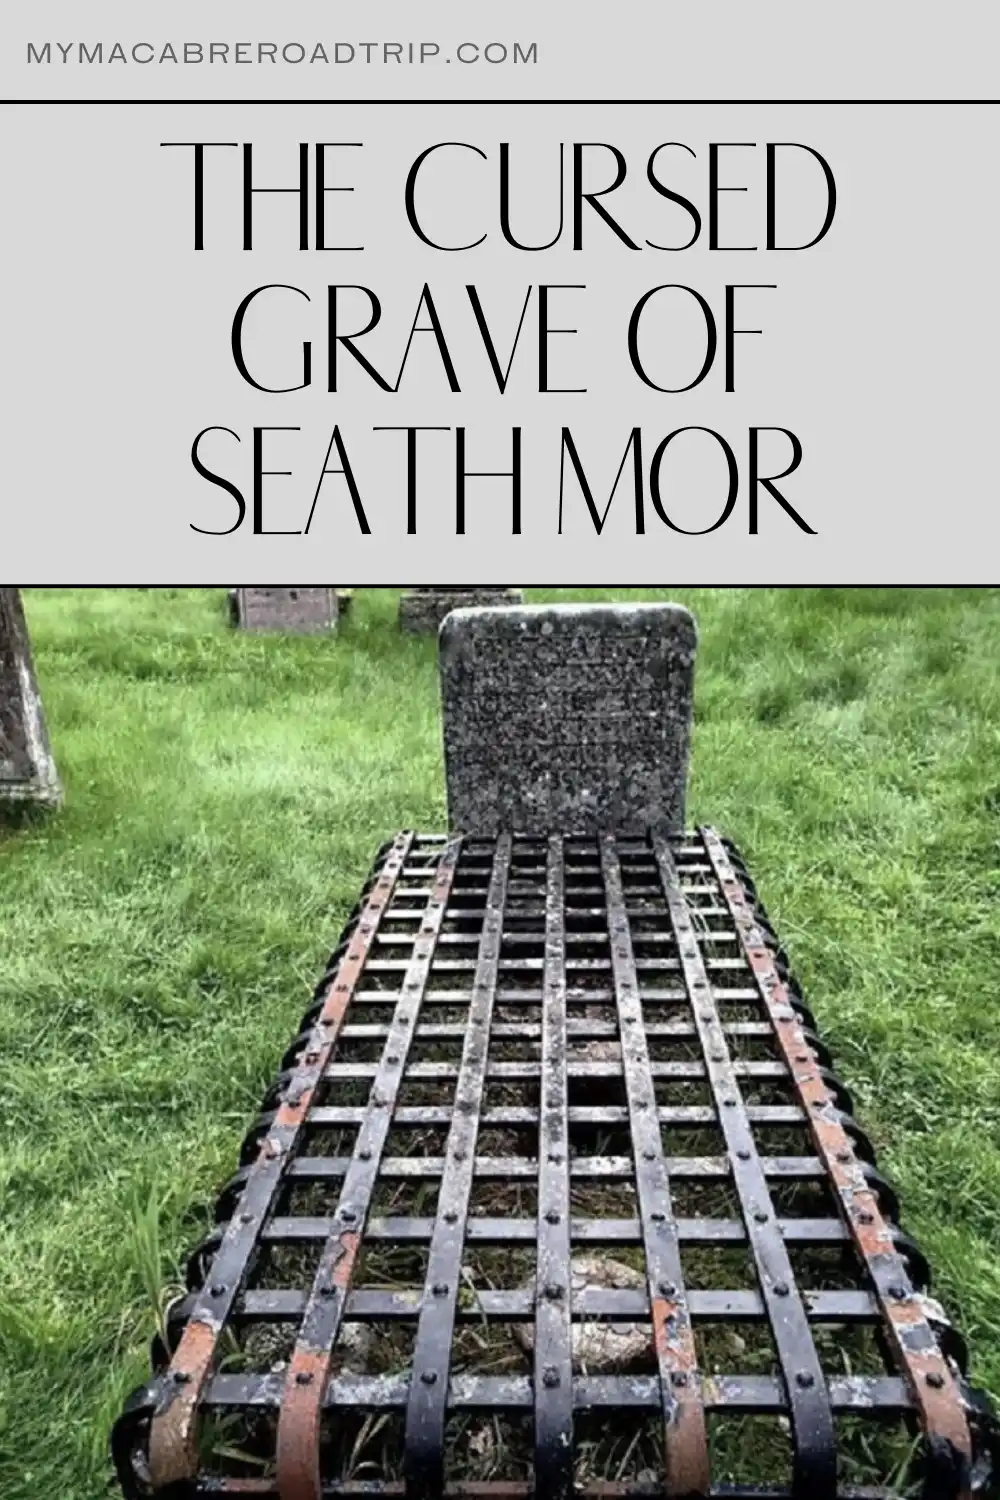 The Cursed Grave of Seath Mor